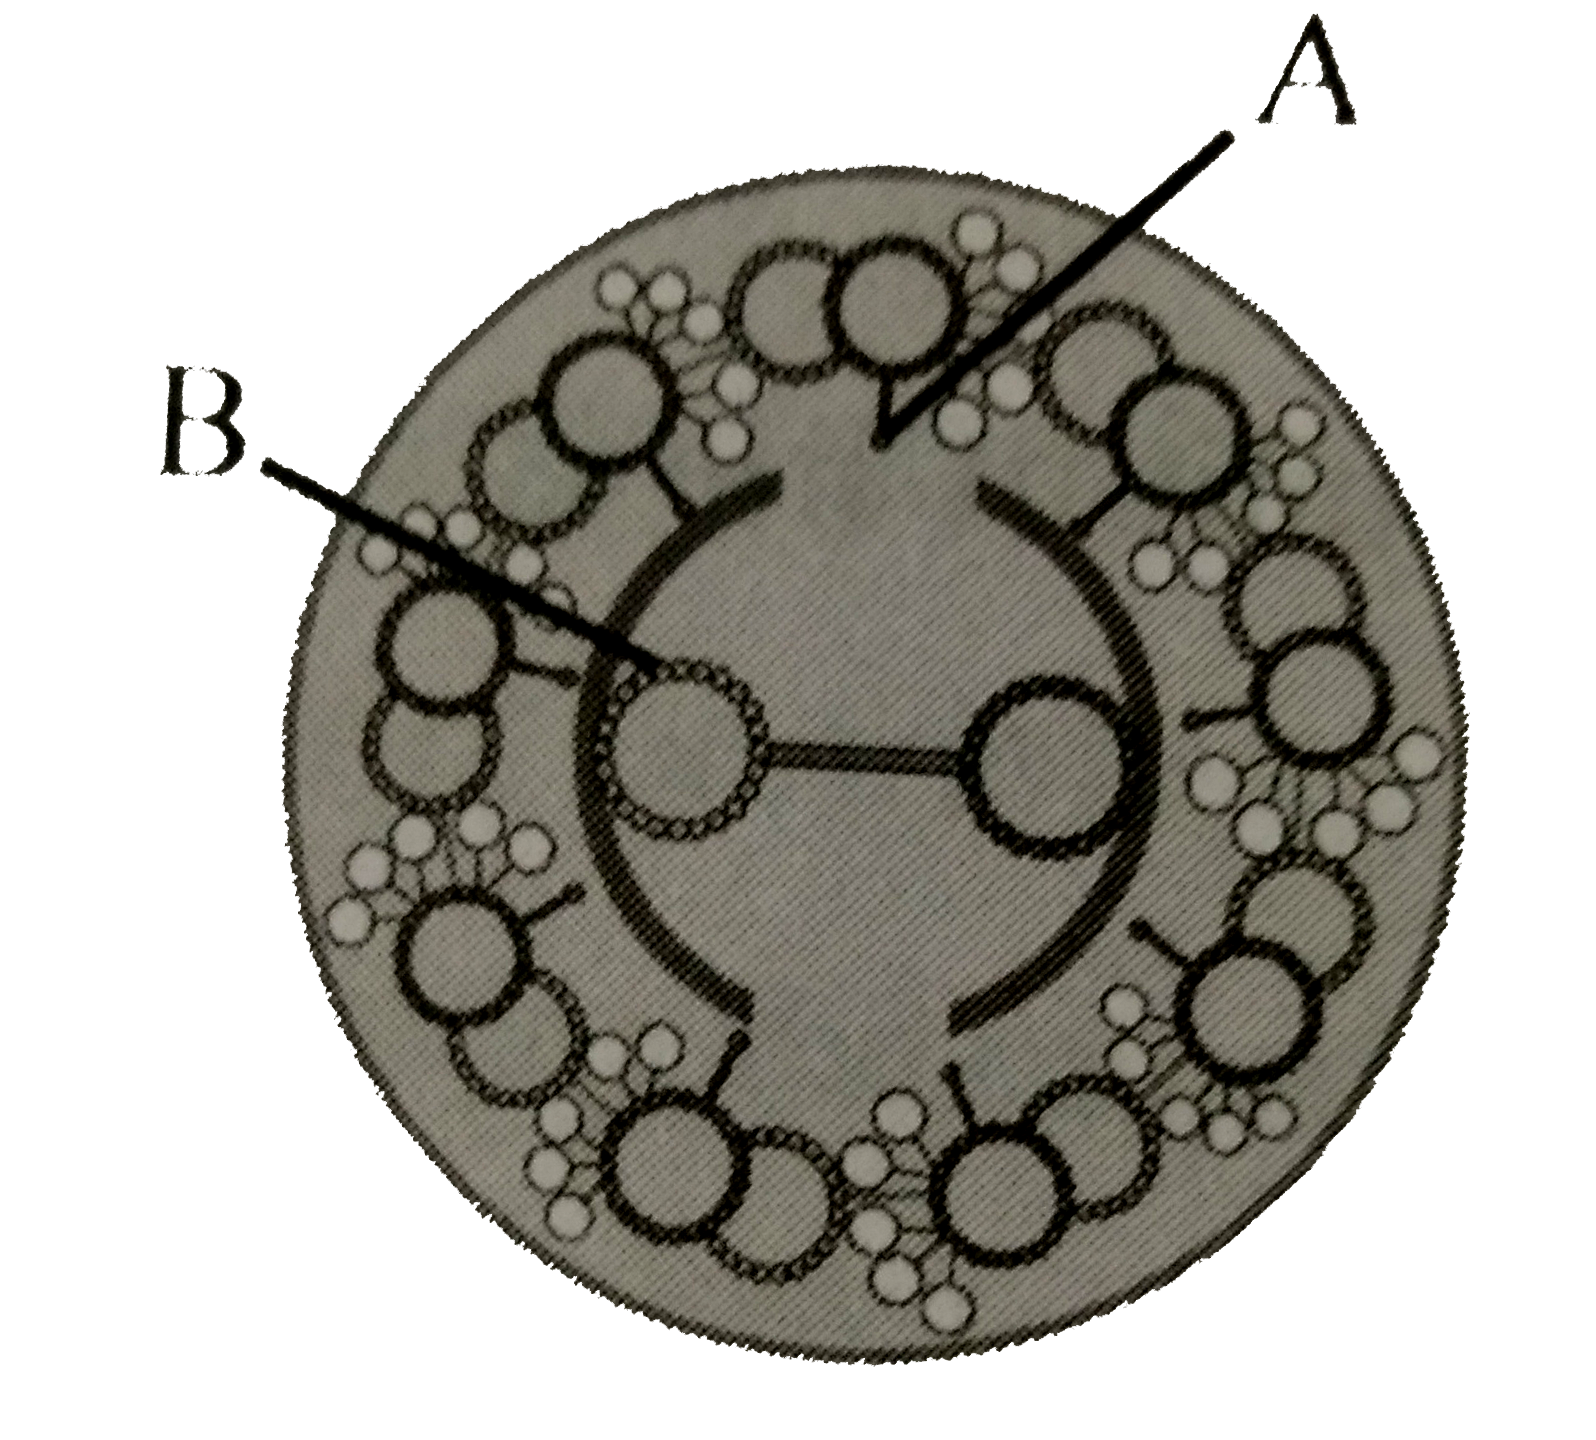 The figure below shows the section of a cillia/flagella showing different parts labelled A and B select the correct labelled name ?